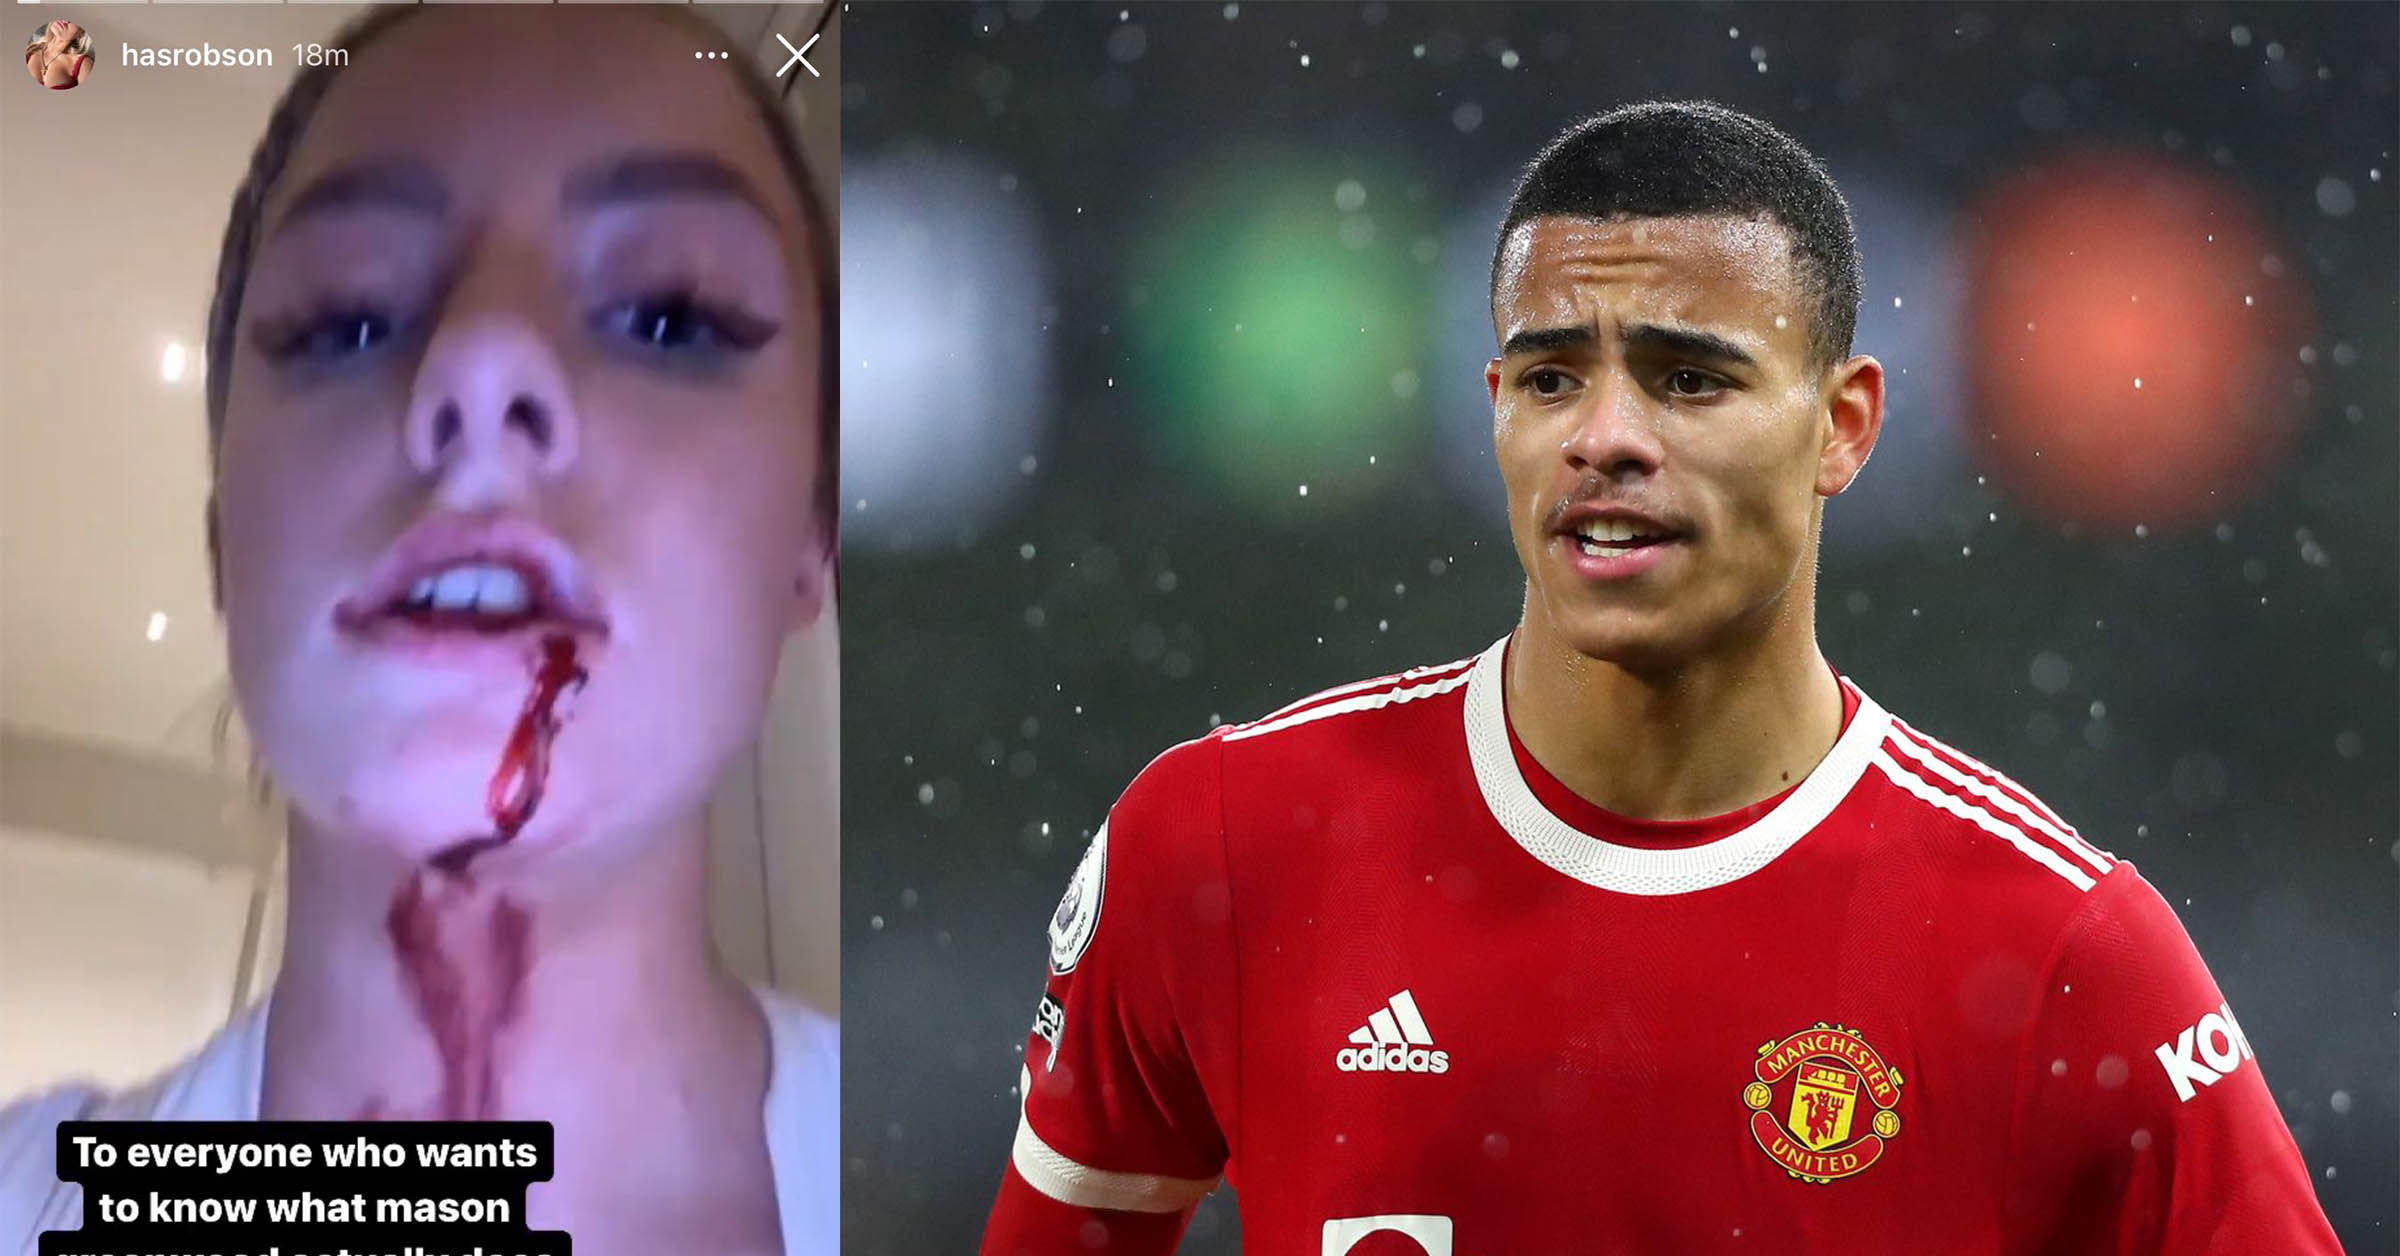 Mason Greenwood Could be in Big Trouble for Serious Allegations